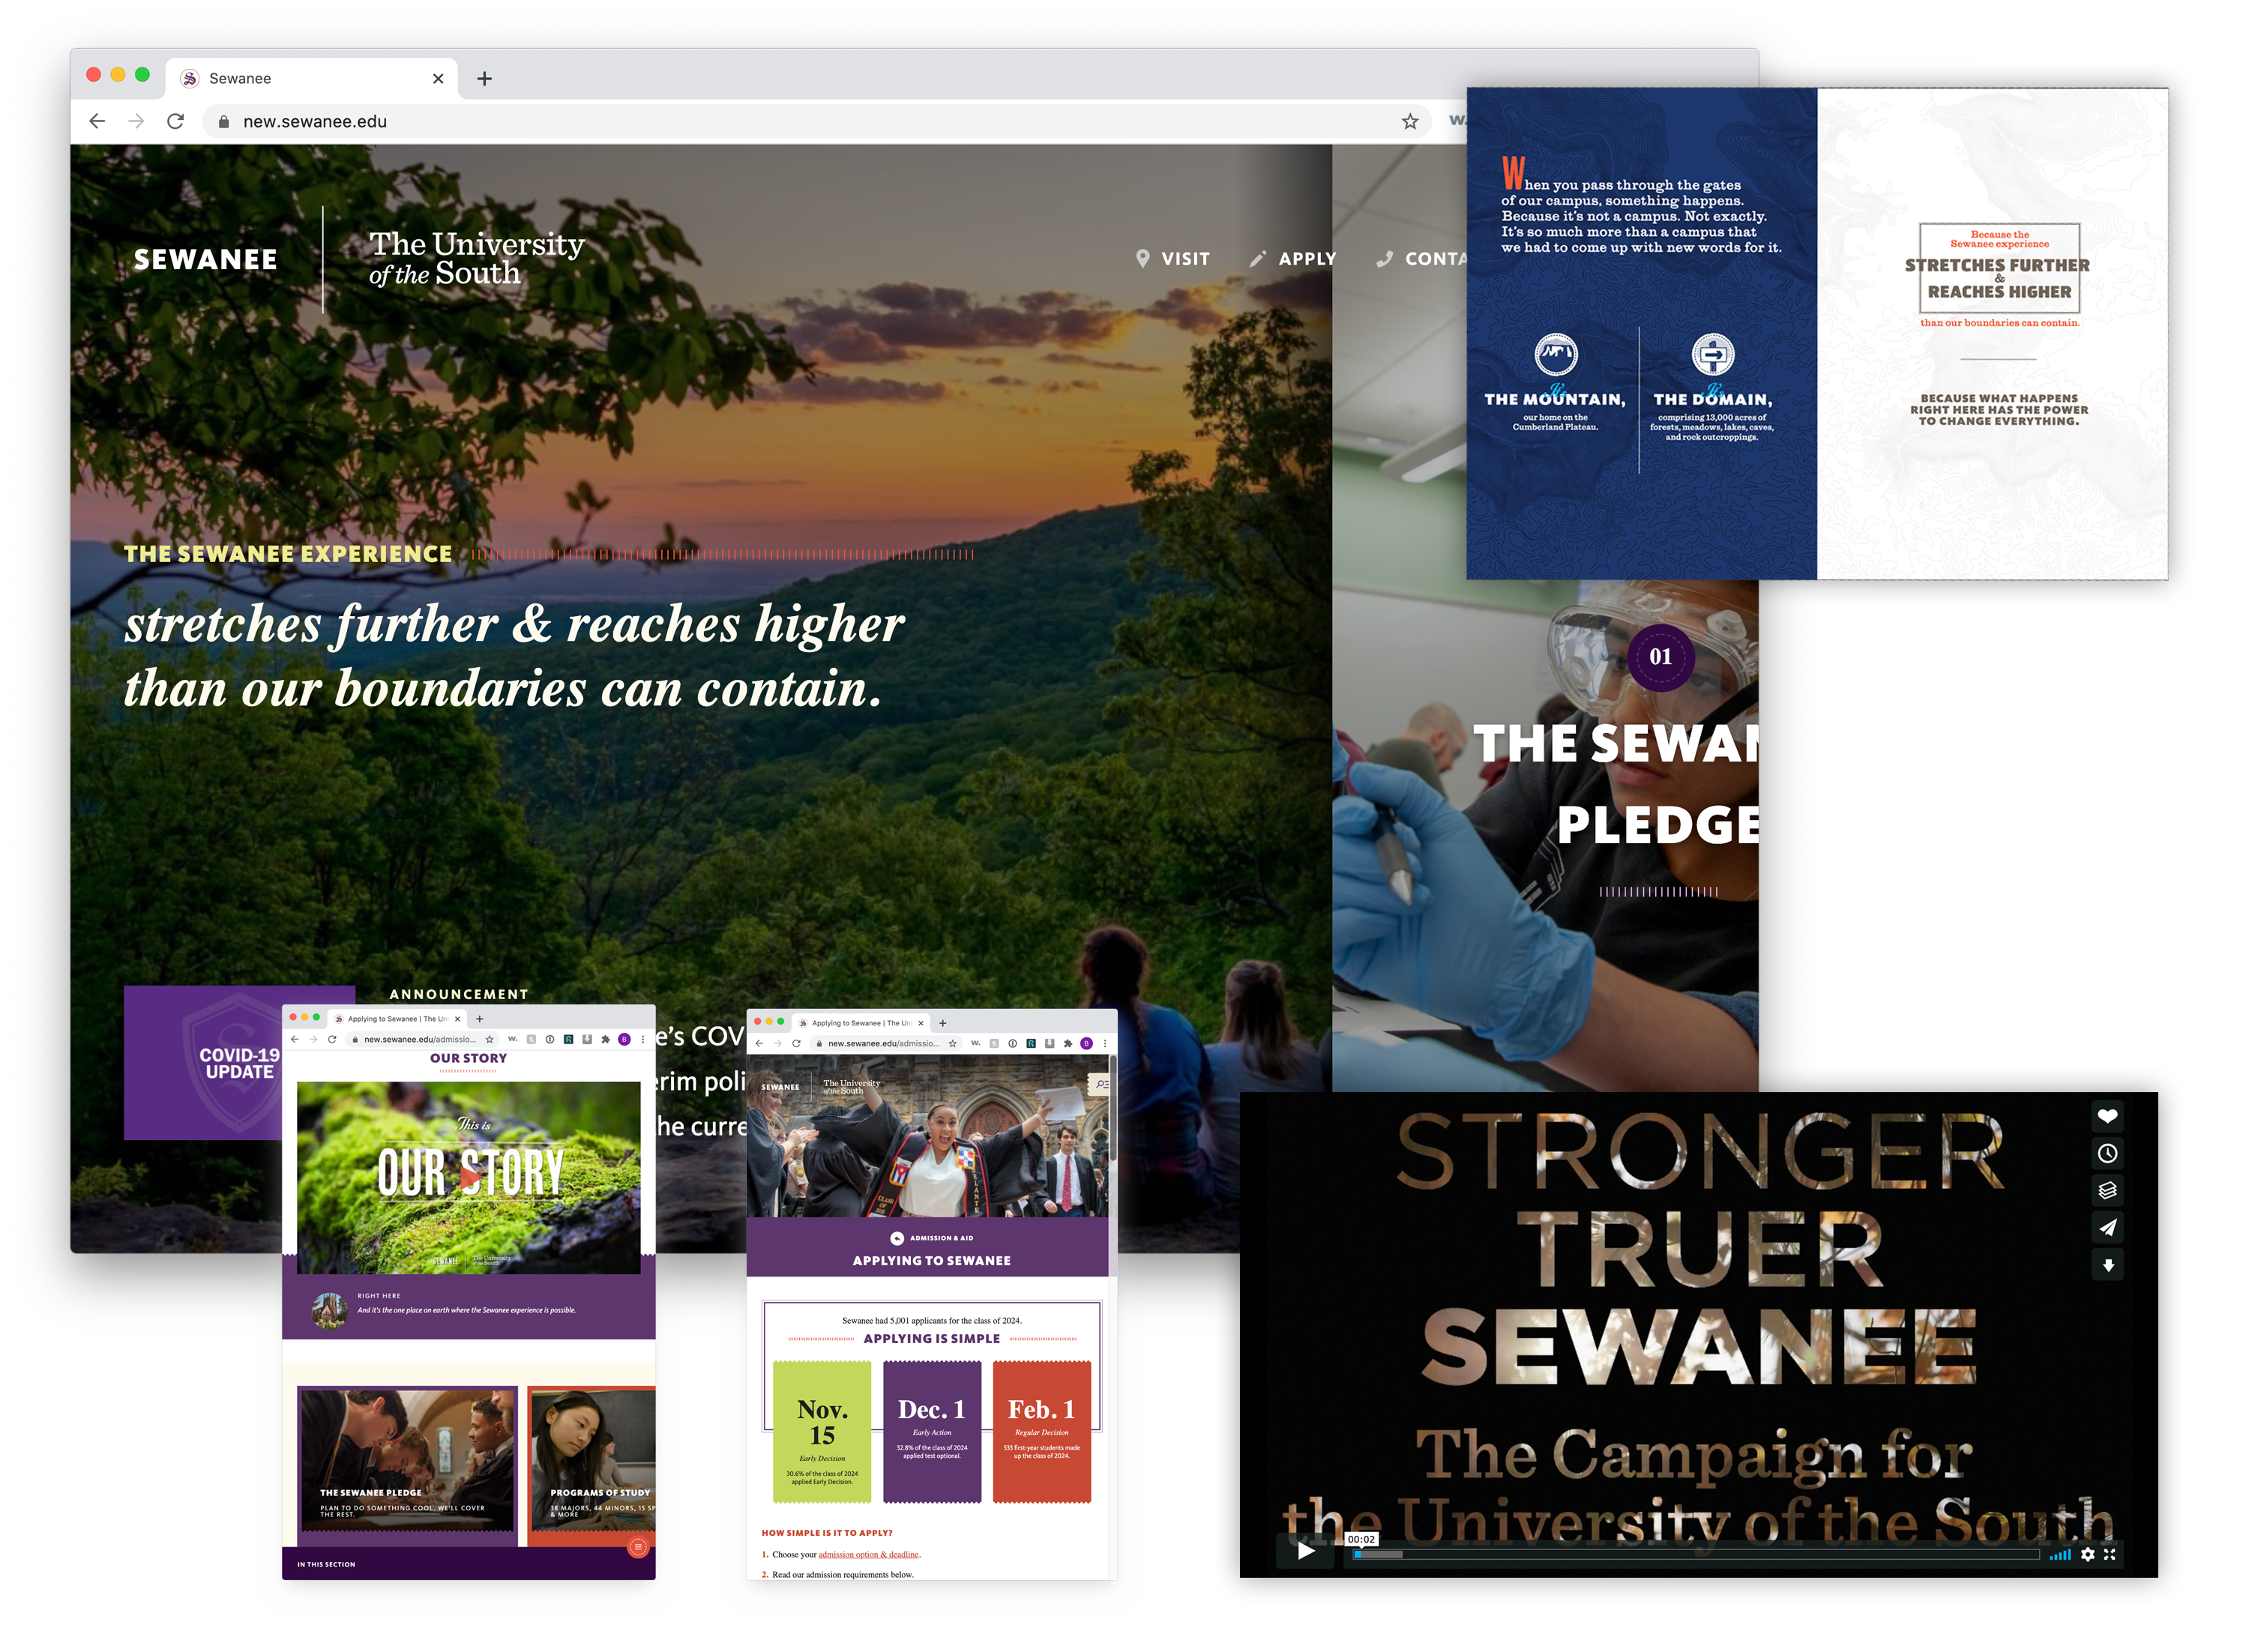 Sewanee website, print materials, and inner pages